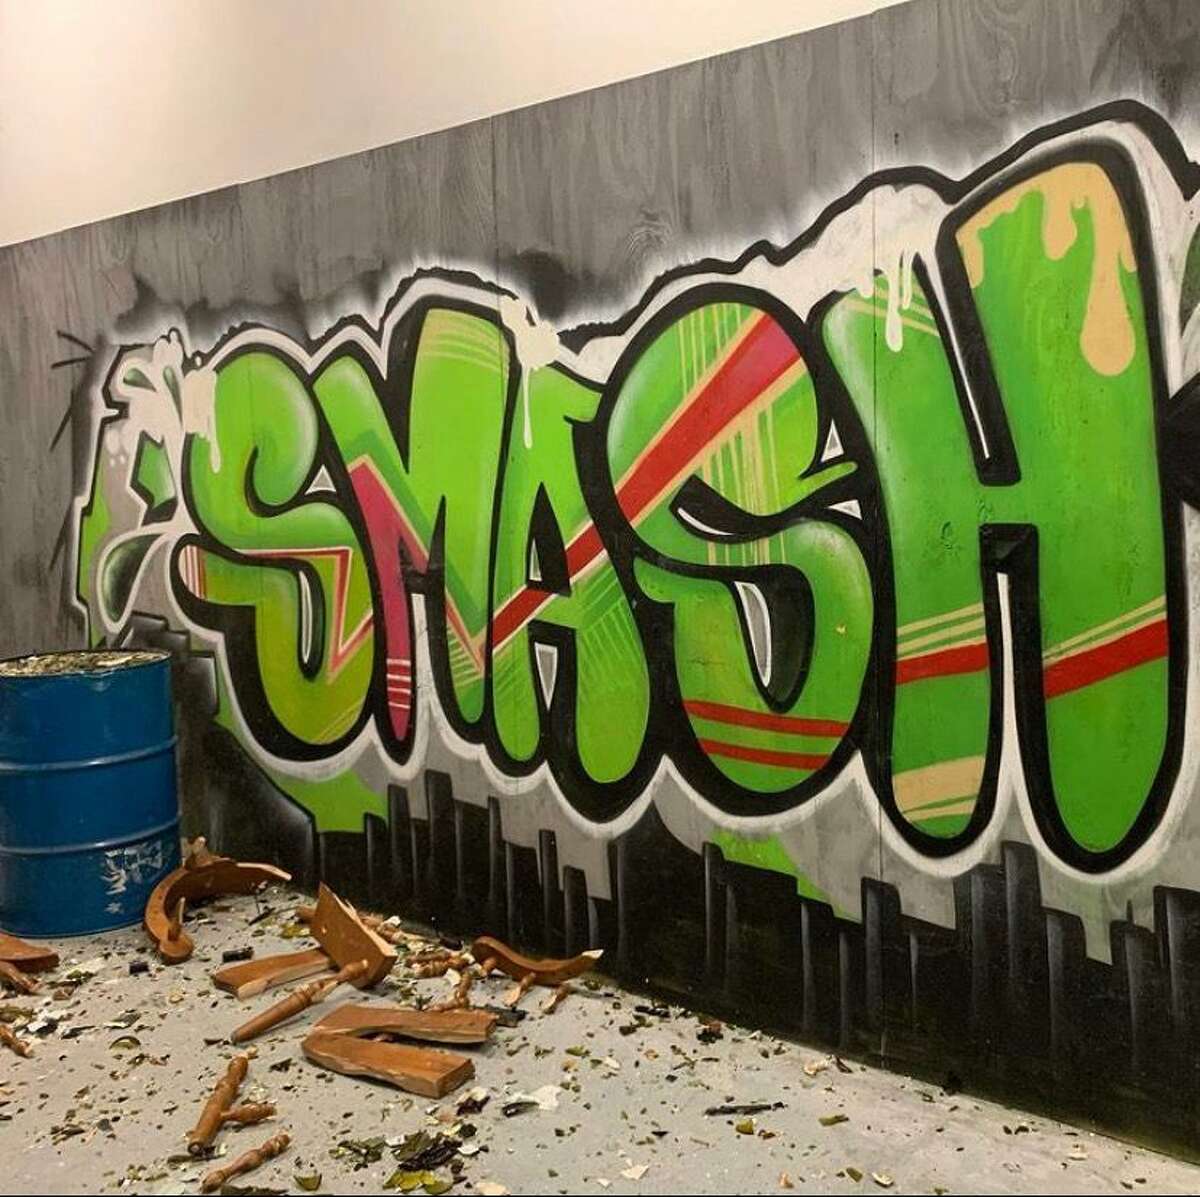 Smash Avenue in West Hartford allows customers to smash and destroy anything from electronics to furniture to plumbing fixtures. It began accepting customers on Nov. 5, 2020.